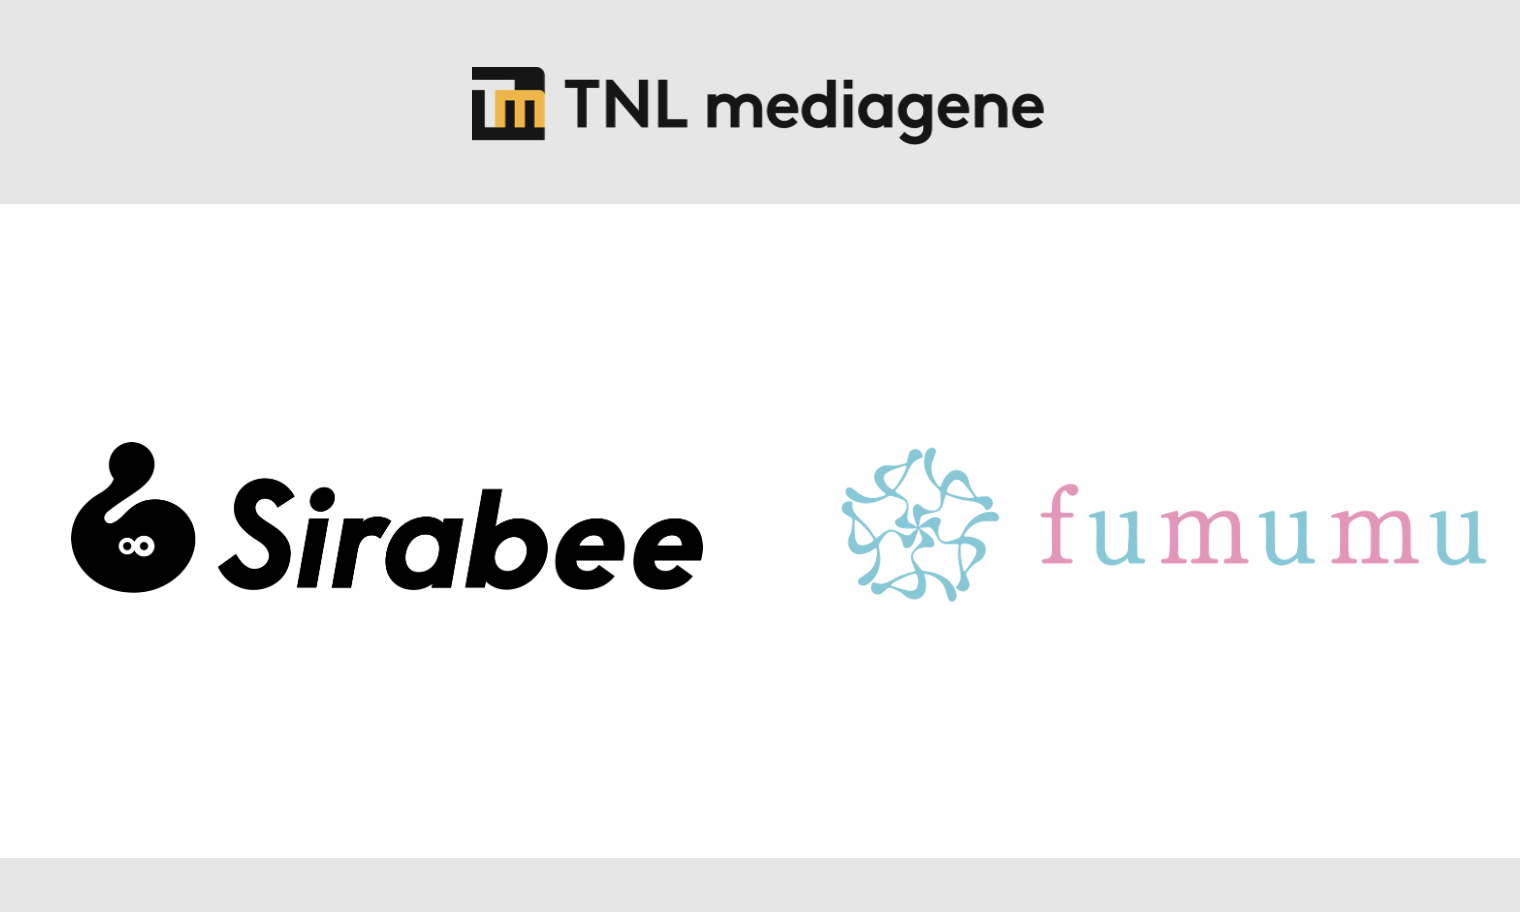 Mediagene Inc. of TNL Mediagene's Group Company Has Announced the Business Acquisition of "Sirabee" and "fumumu"